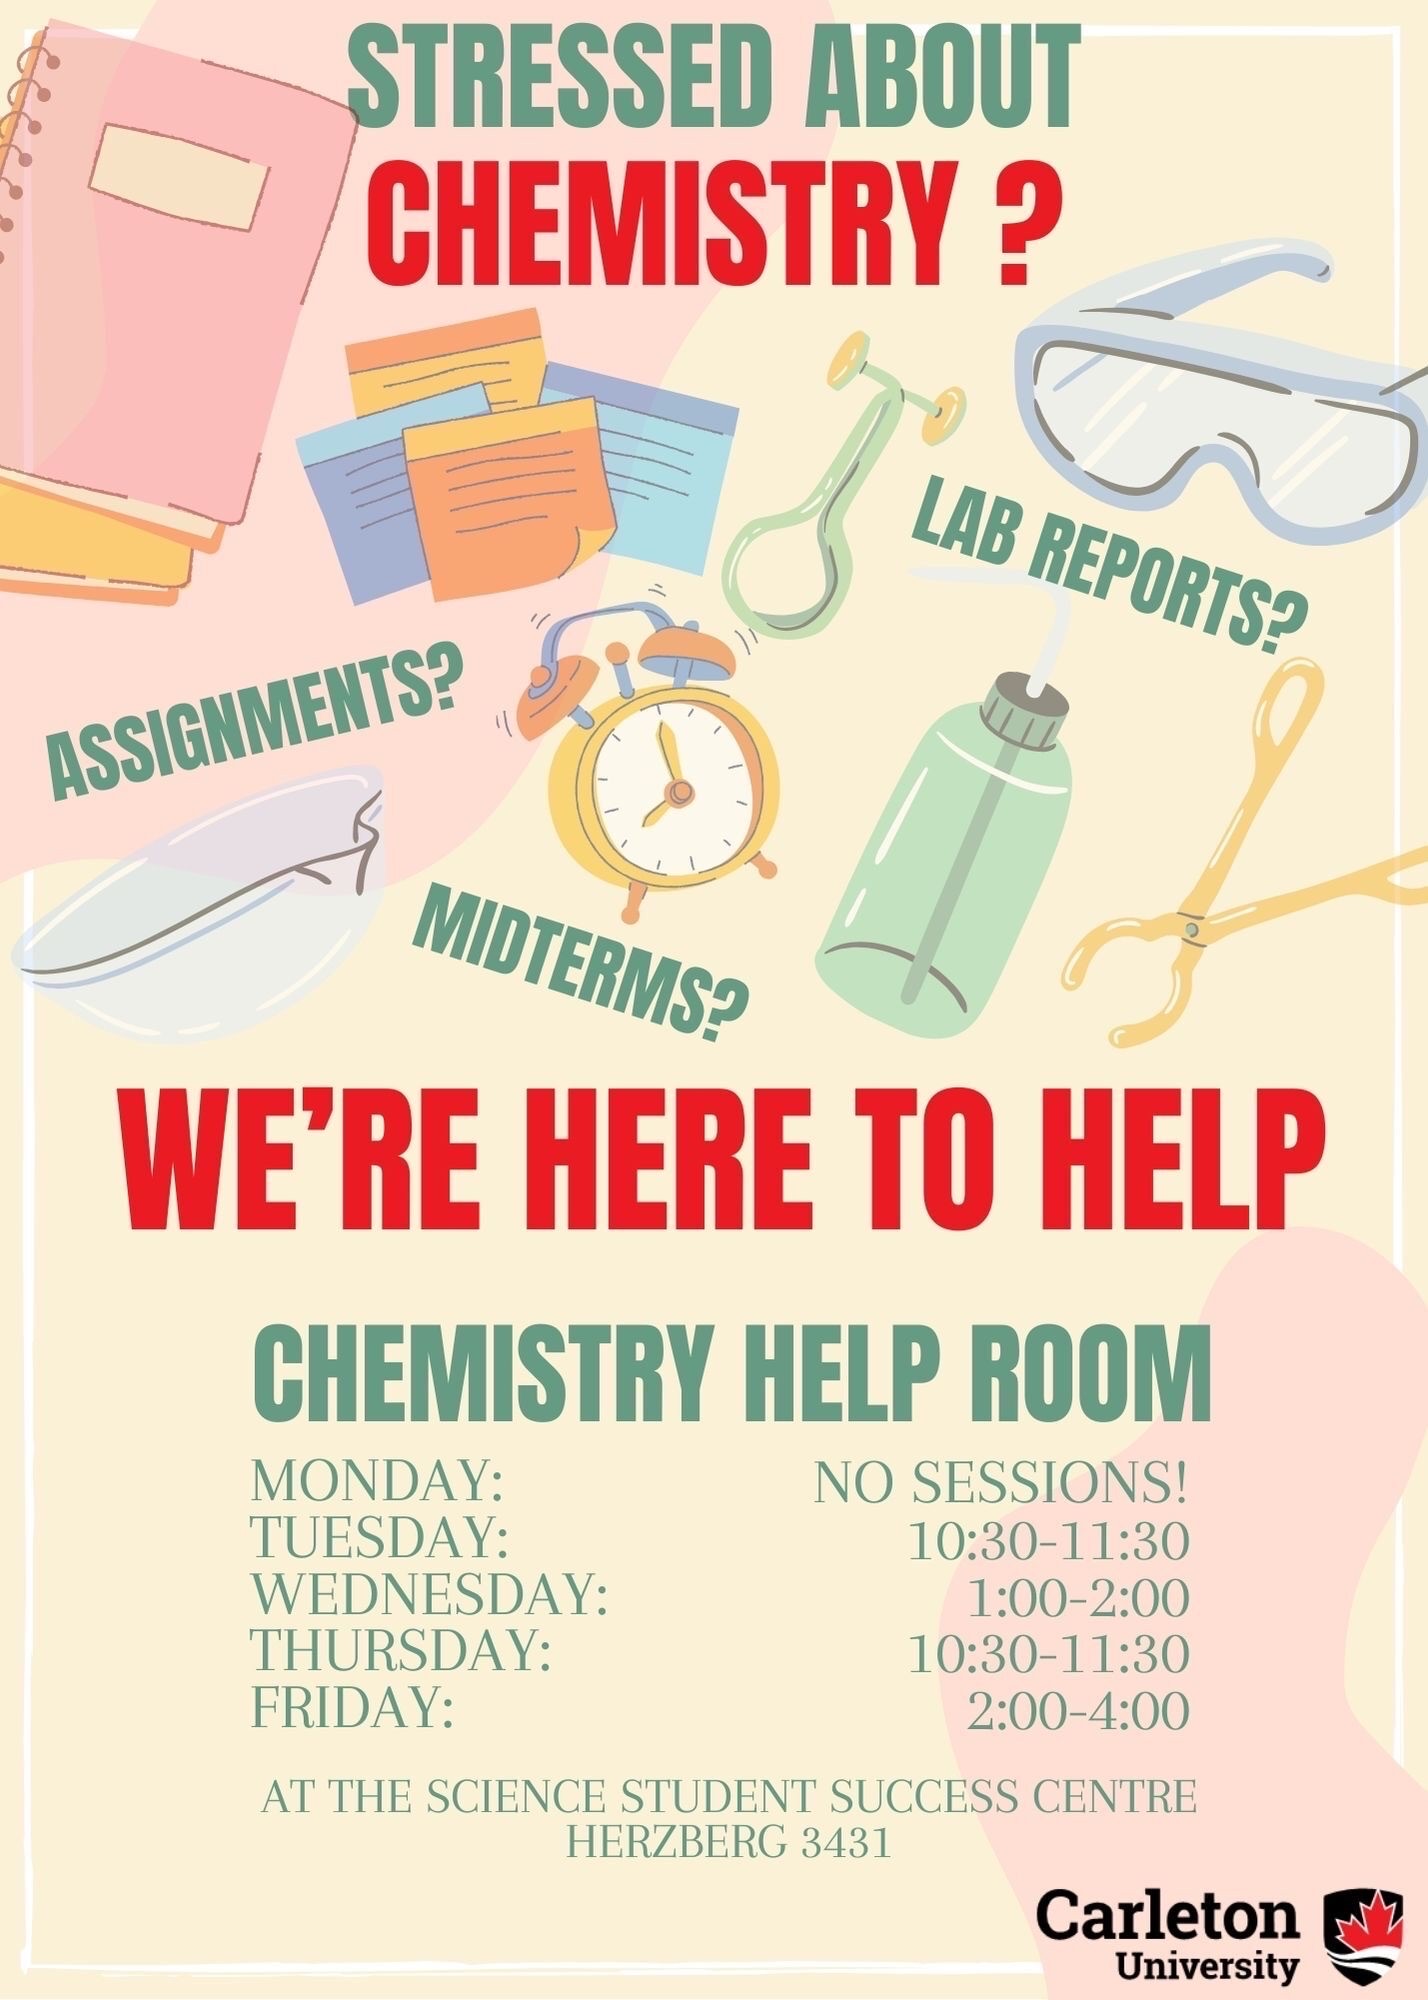 Poster with text. Text reads: Stressed about Chemistry? Assignments? Lab Reports? Midterms? We're Here to Help. Chemistry Help Room. Monday: No Sessions. Tuesday: 10:30-11:30. Wednesday: 1:00-2:00. Thursday: 10:30-11:30. Friday: 2:00-4:00. At the Science Student Success Centre, Herzberg 3431. Carleton Unviersity.